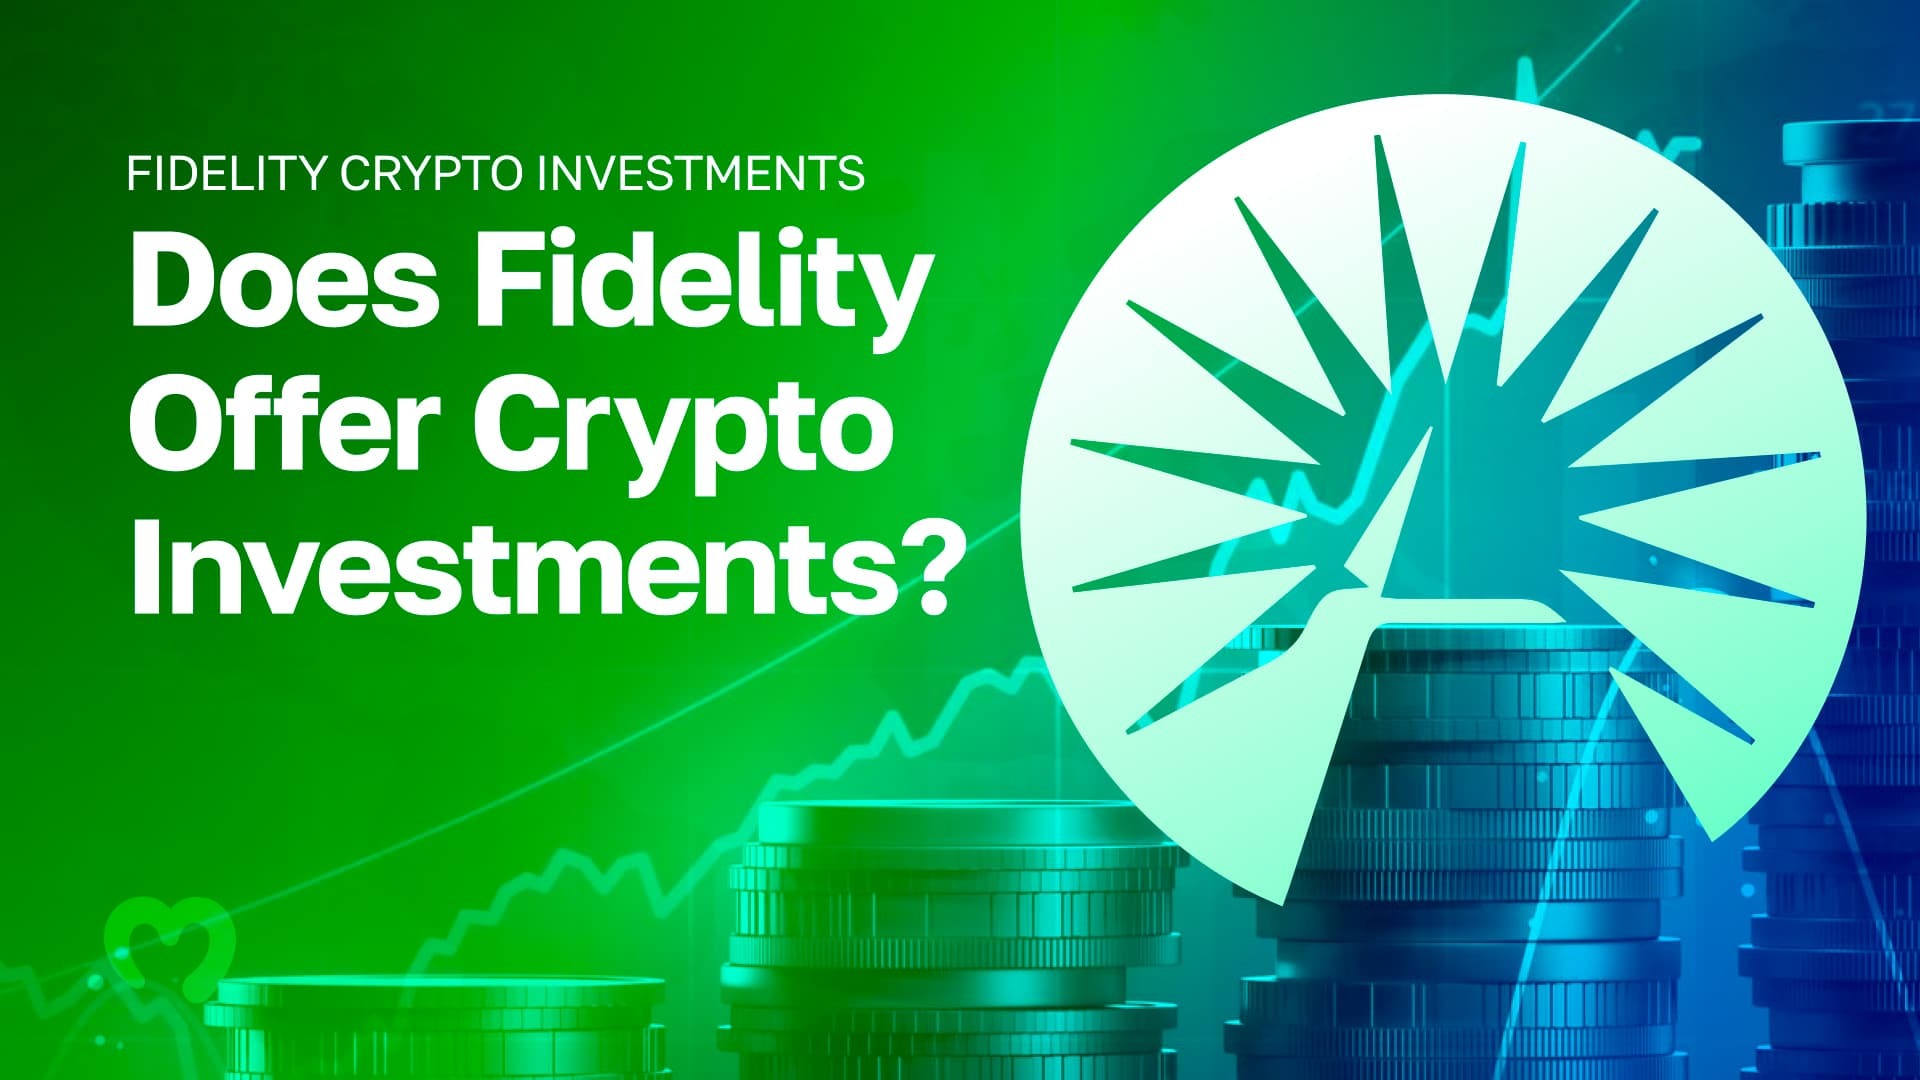 Fidelity Workplace Digital Assets Account